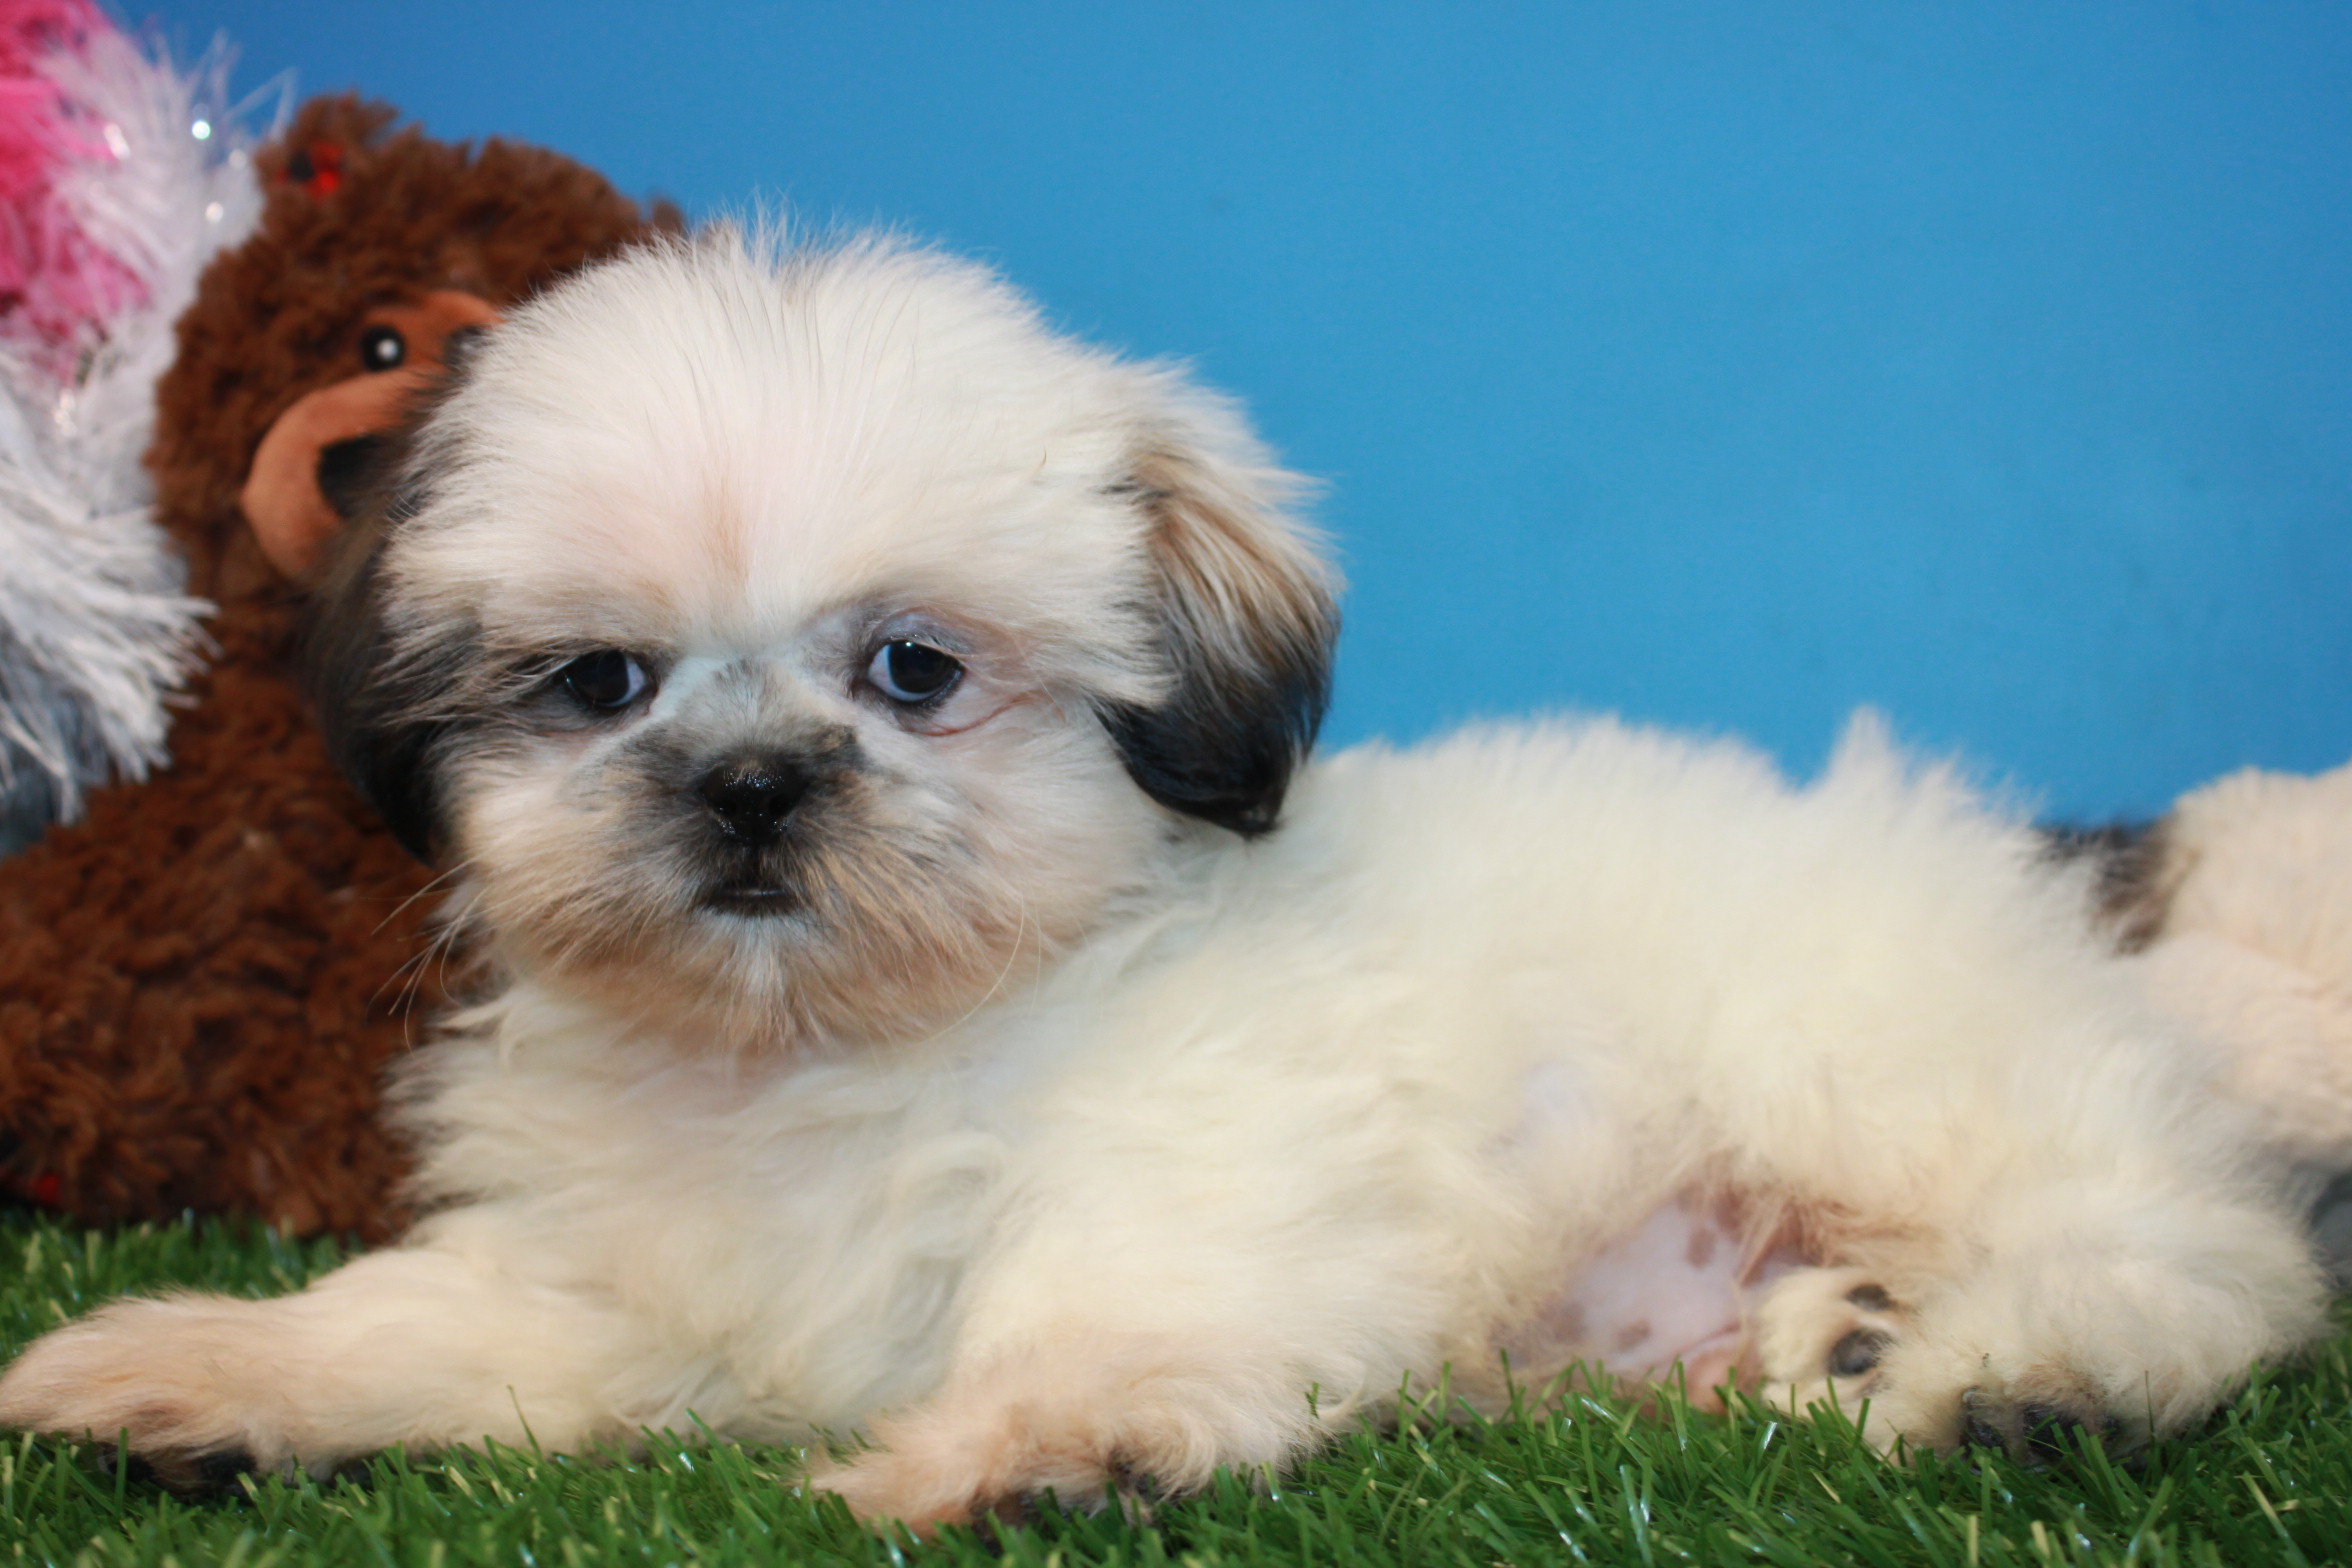 Shih-Tzu Puppies For Sale - Long Island Puppies